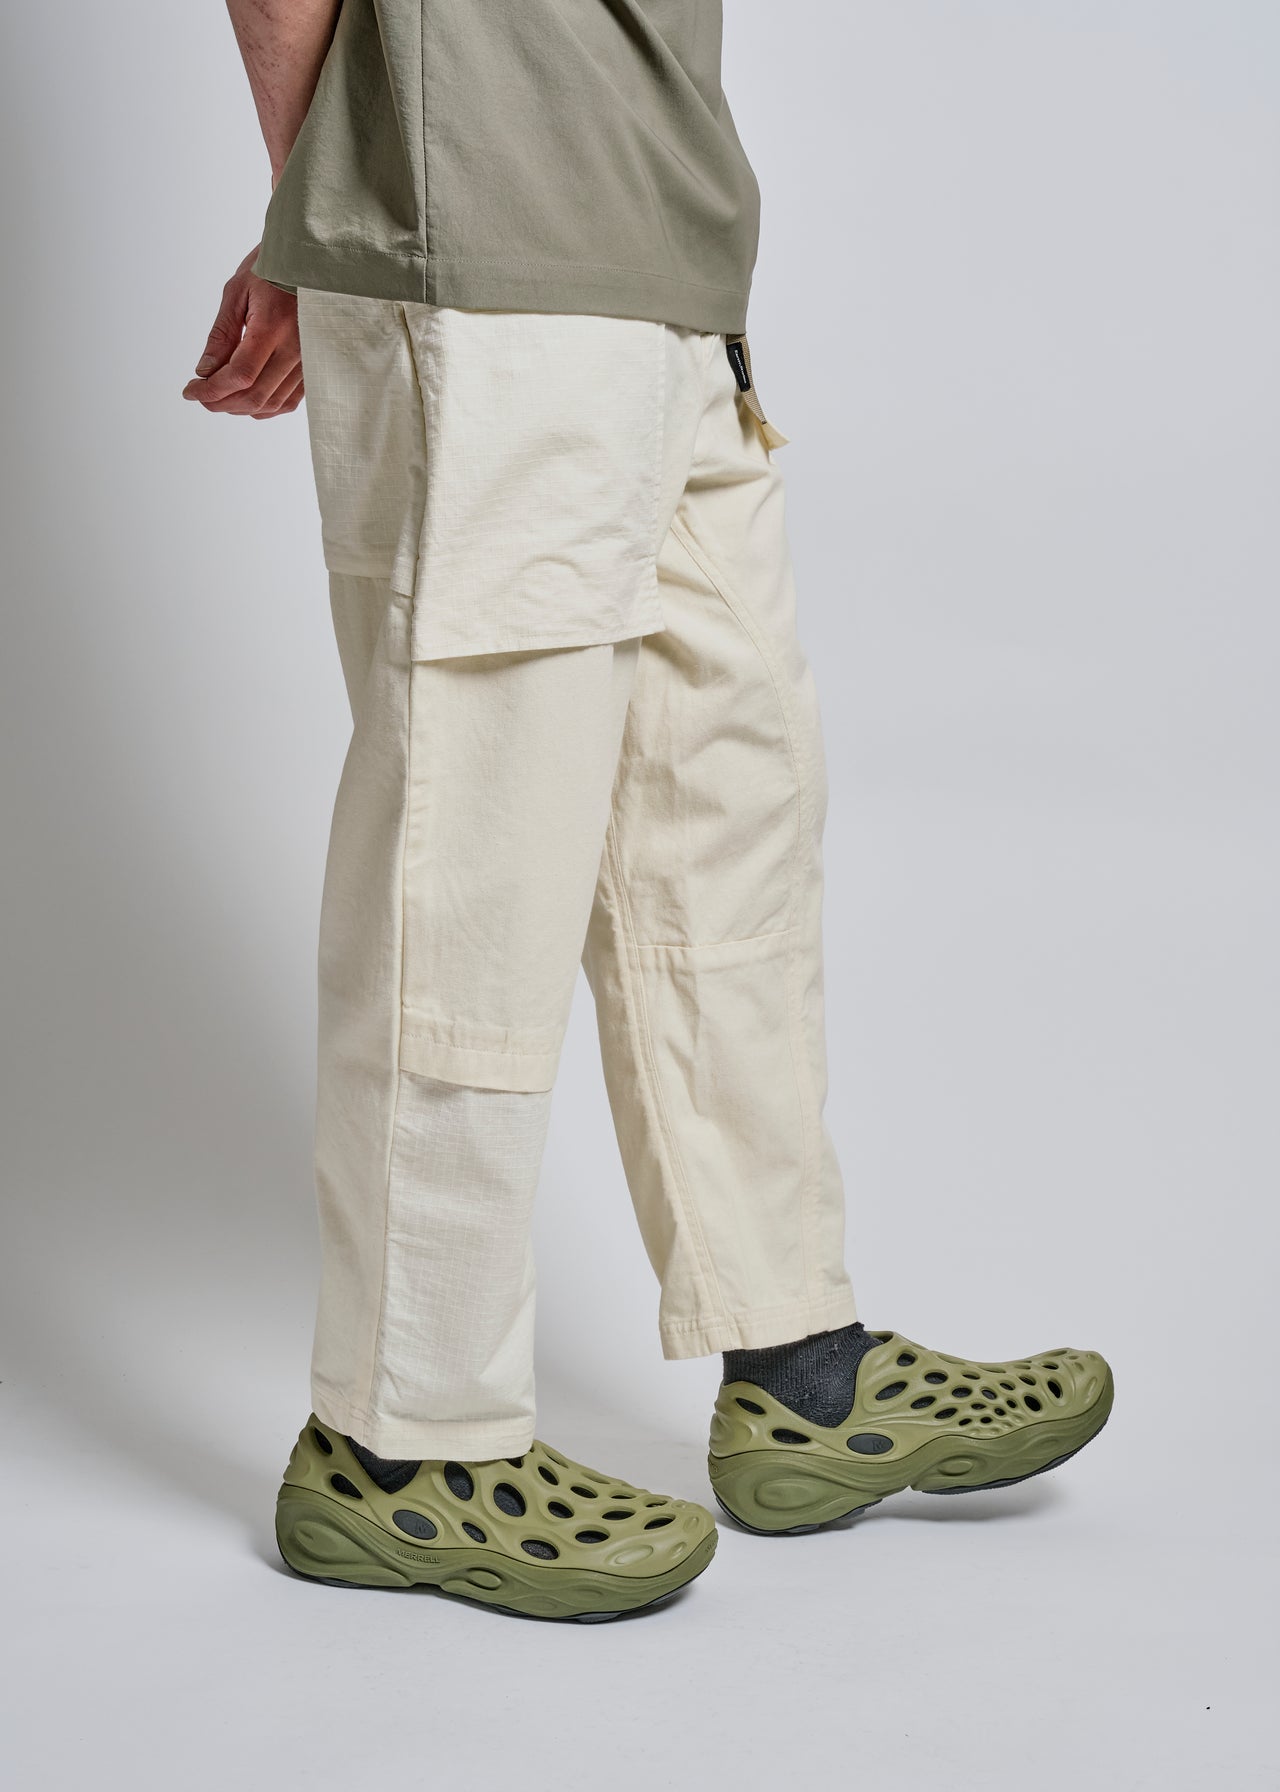 MP-103 Field Pant in Earth White